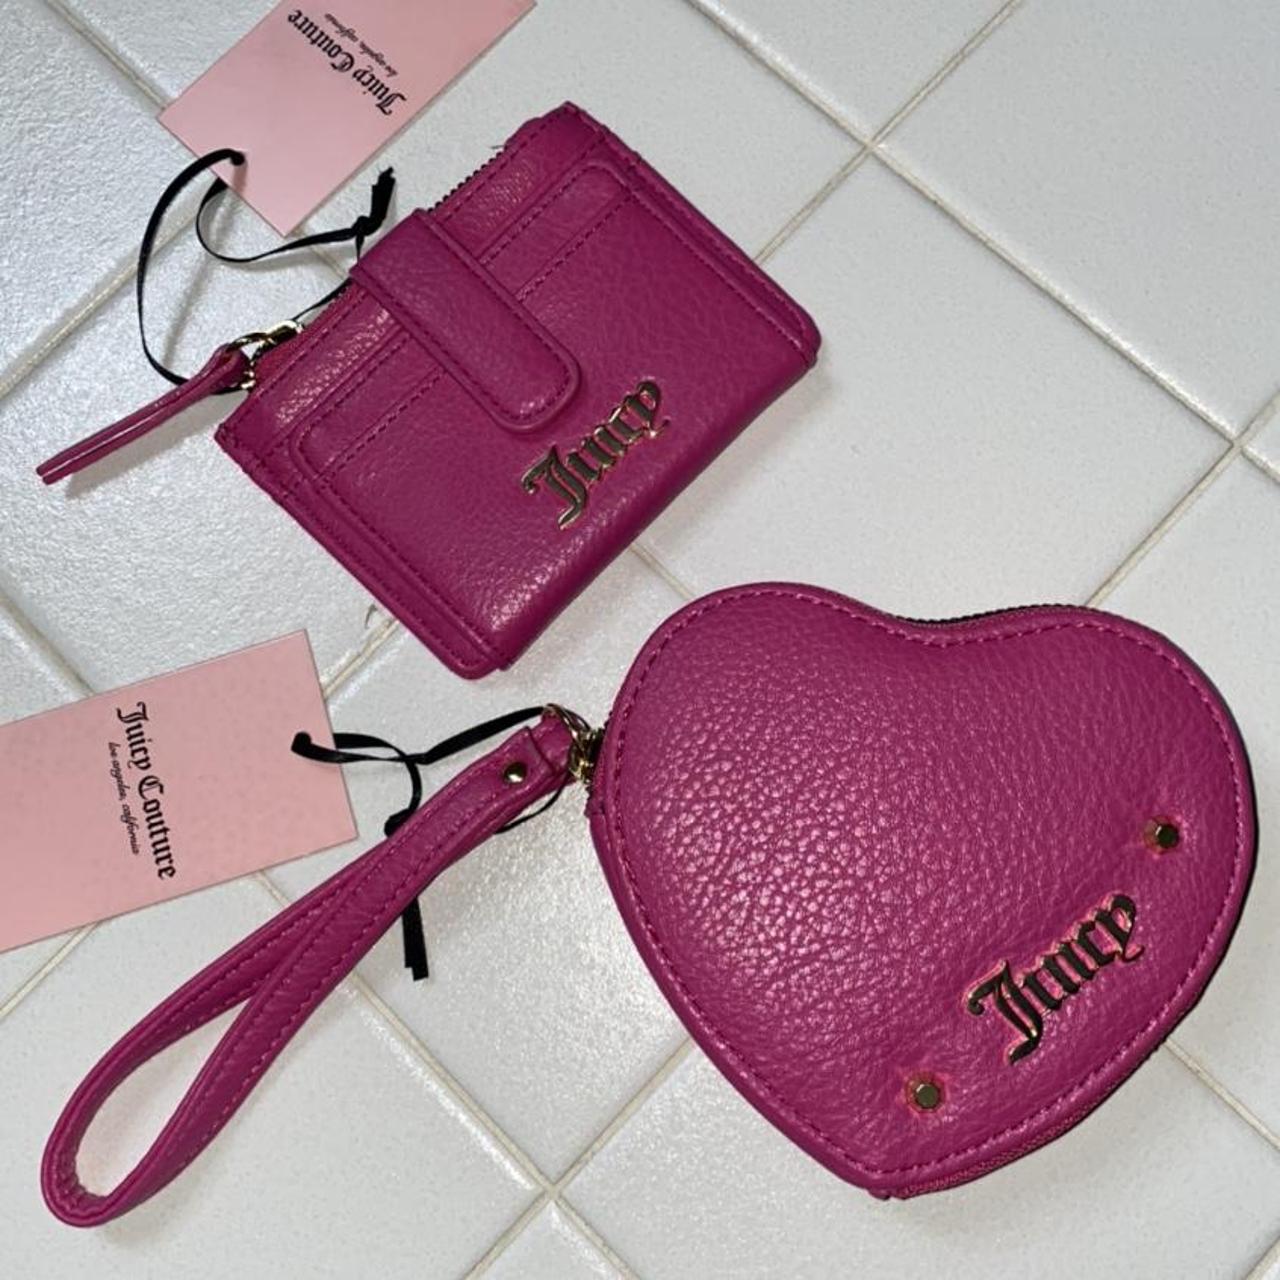 Juicy couture mini purses/wallets and lanyard - general for sale - by owner  - craigslist